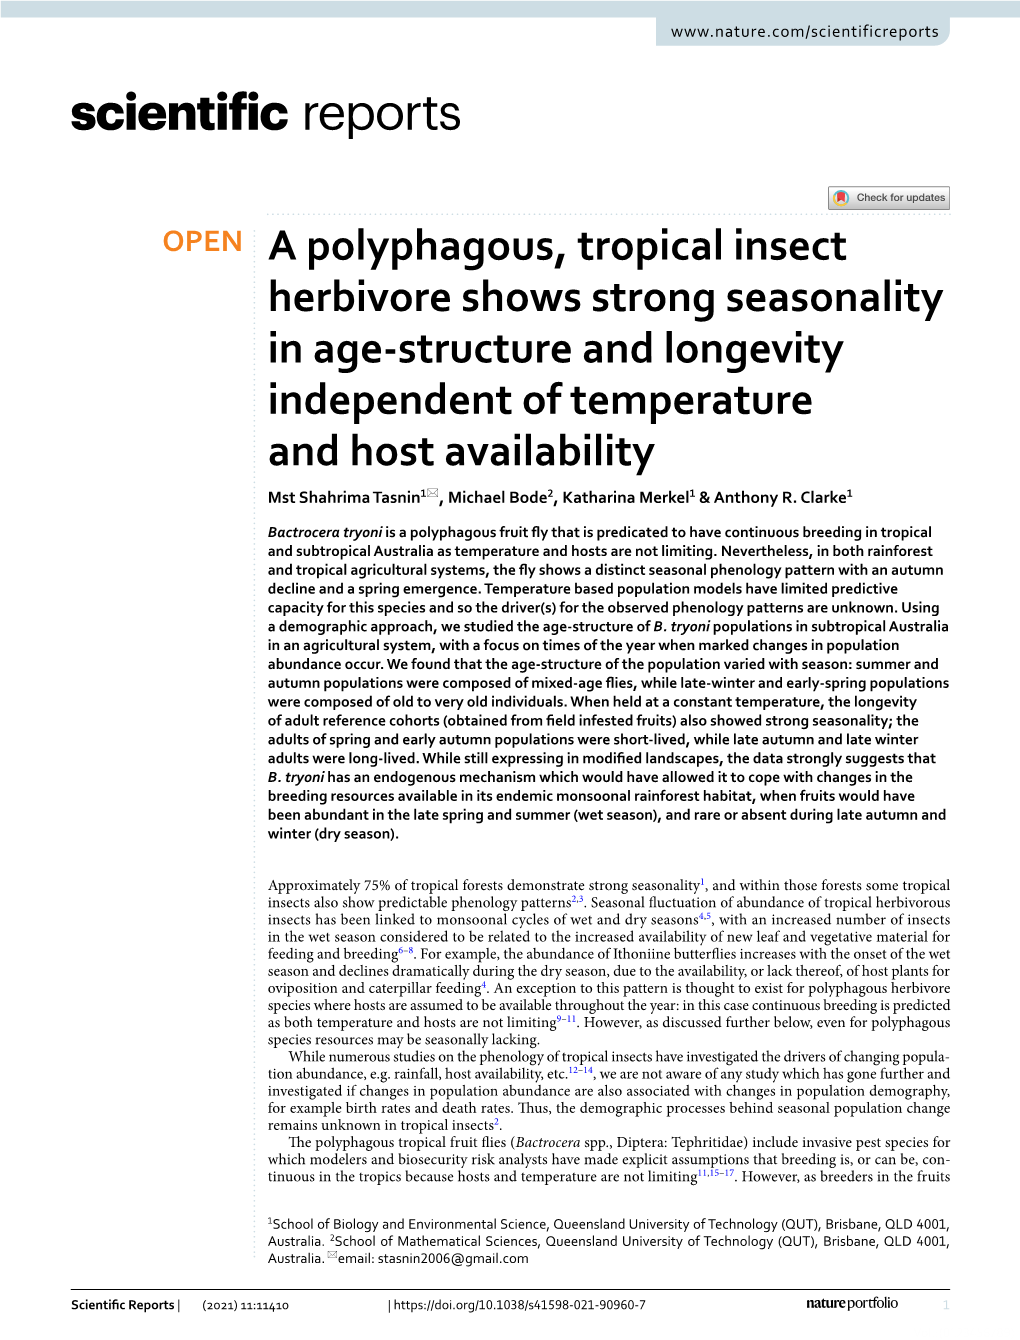 A Polyphagous, Tropical Insect Herbivore Shows Strong Seasonality in Age-Structure and Longevity Independent of Temperature